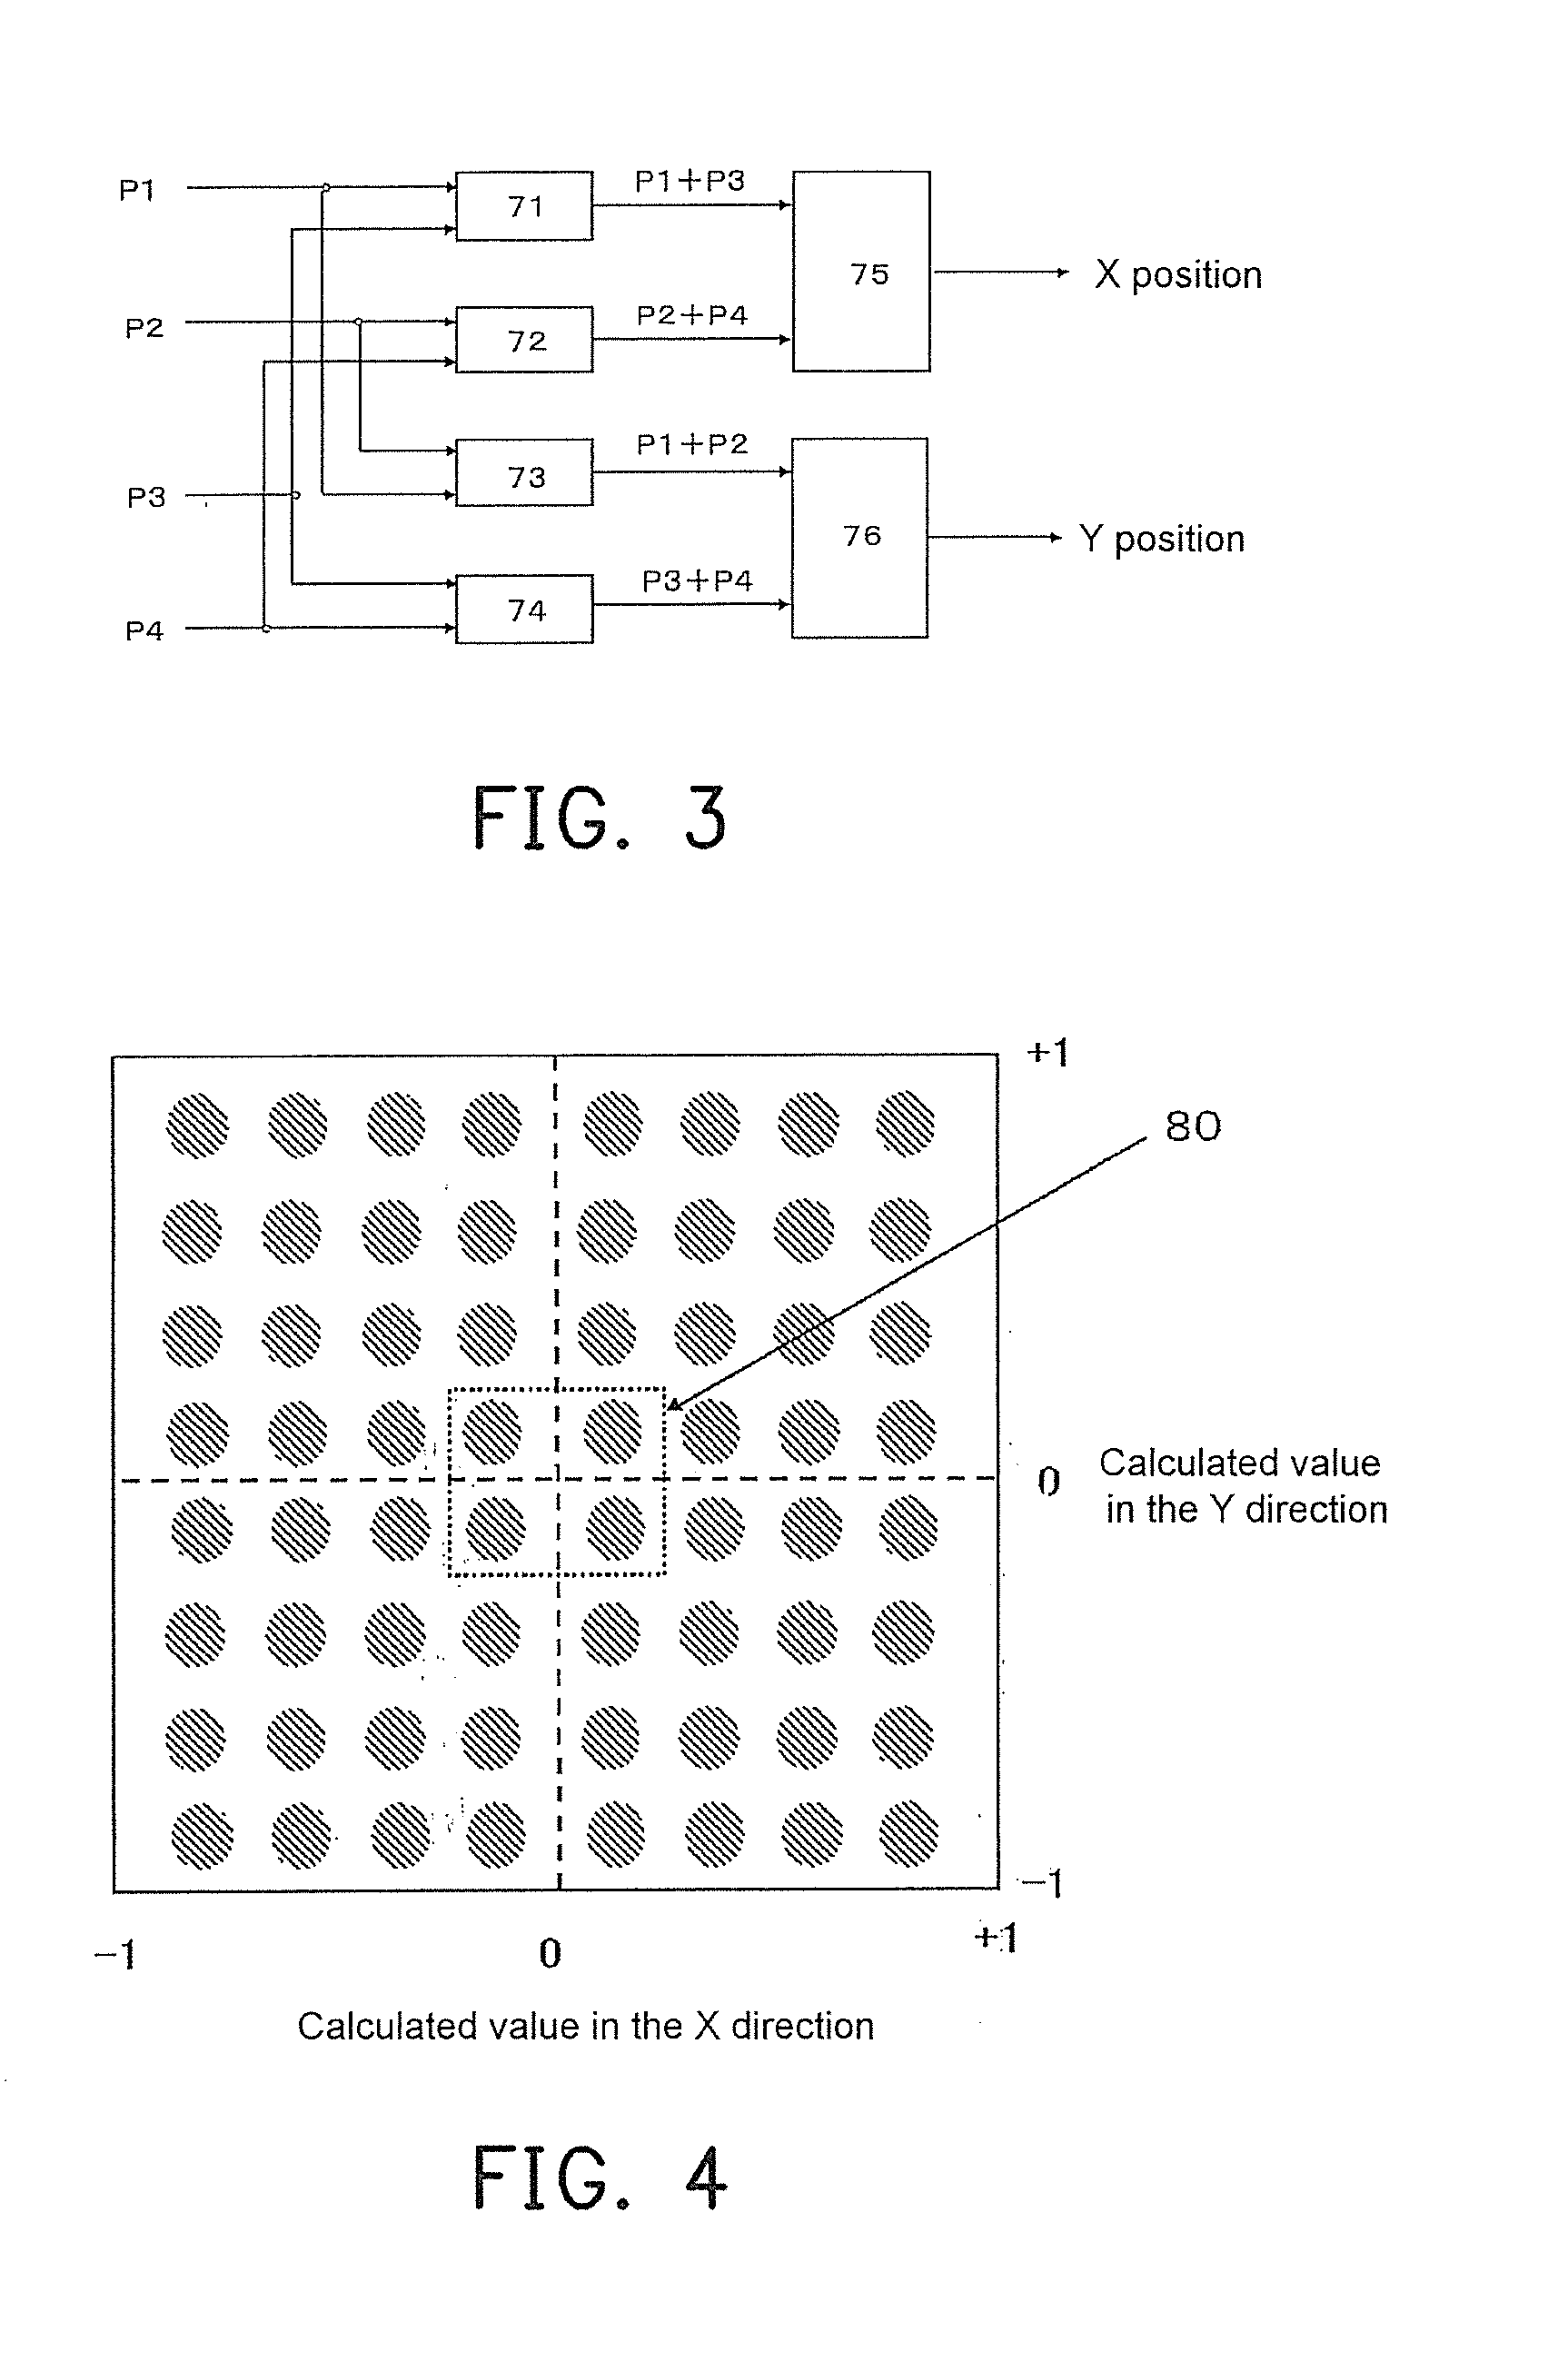 Nuclear medical diagnostic device